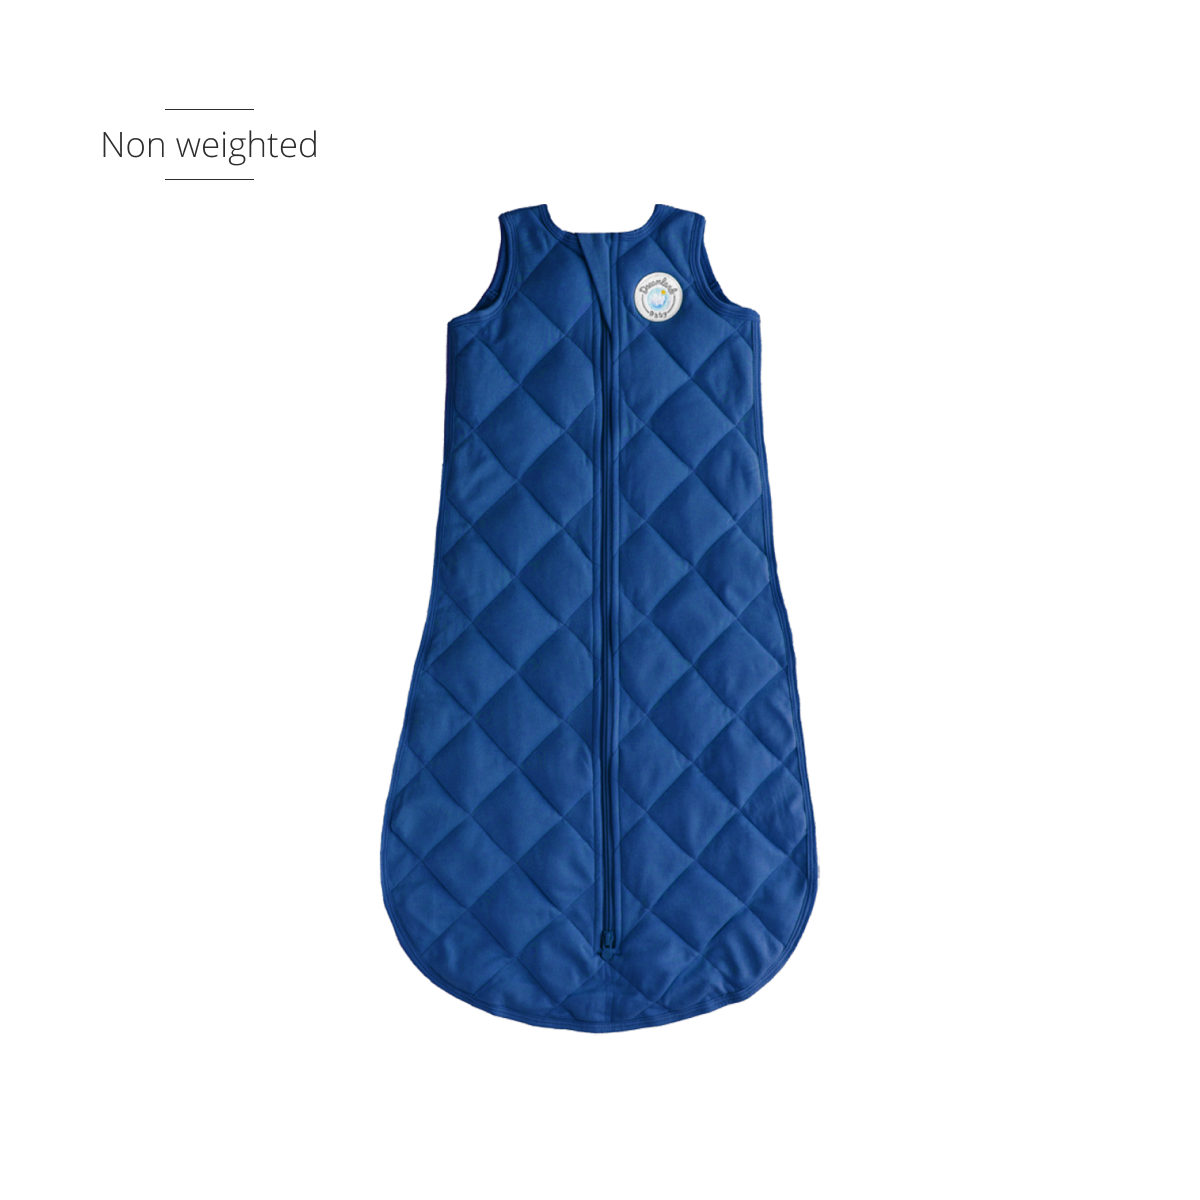 Bamboo Classic Sleep Sack (Non-weighted)